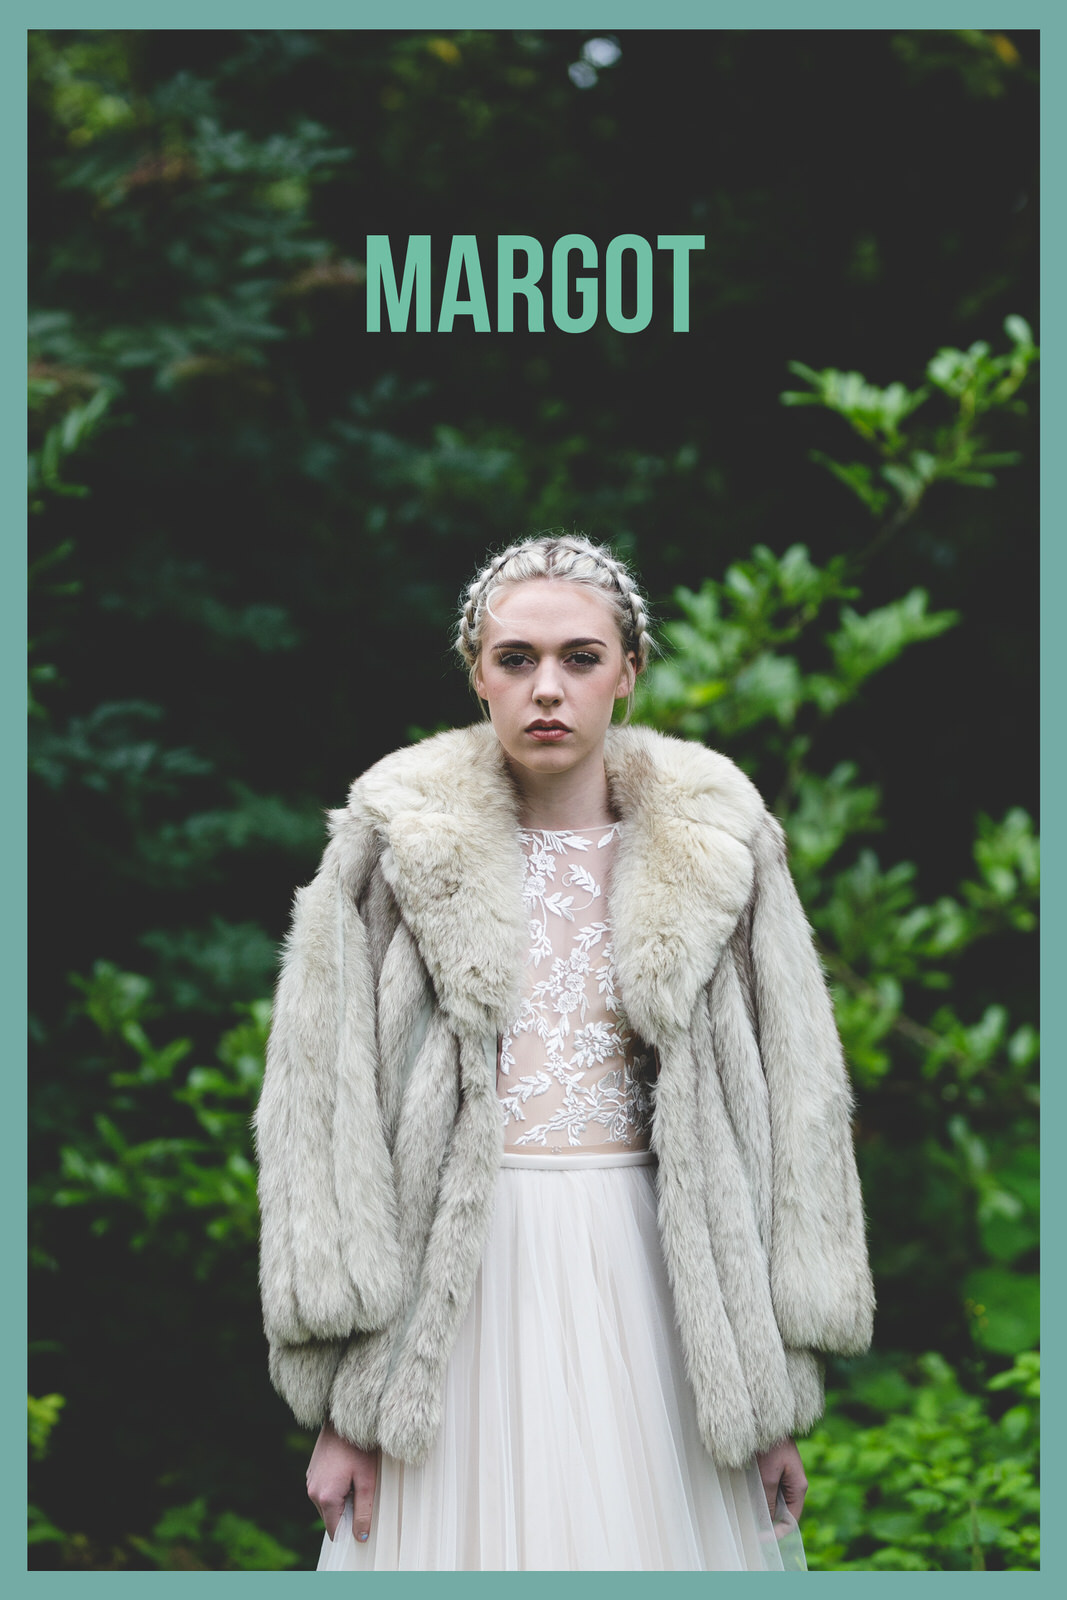 Margot styled bride from the royal tenenbaums 